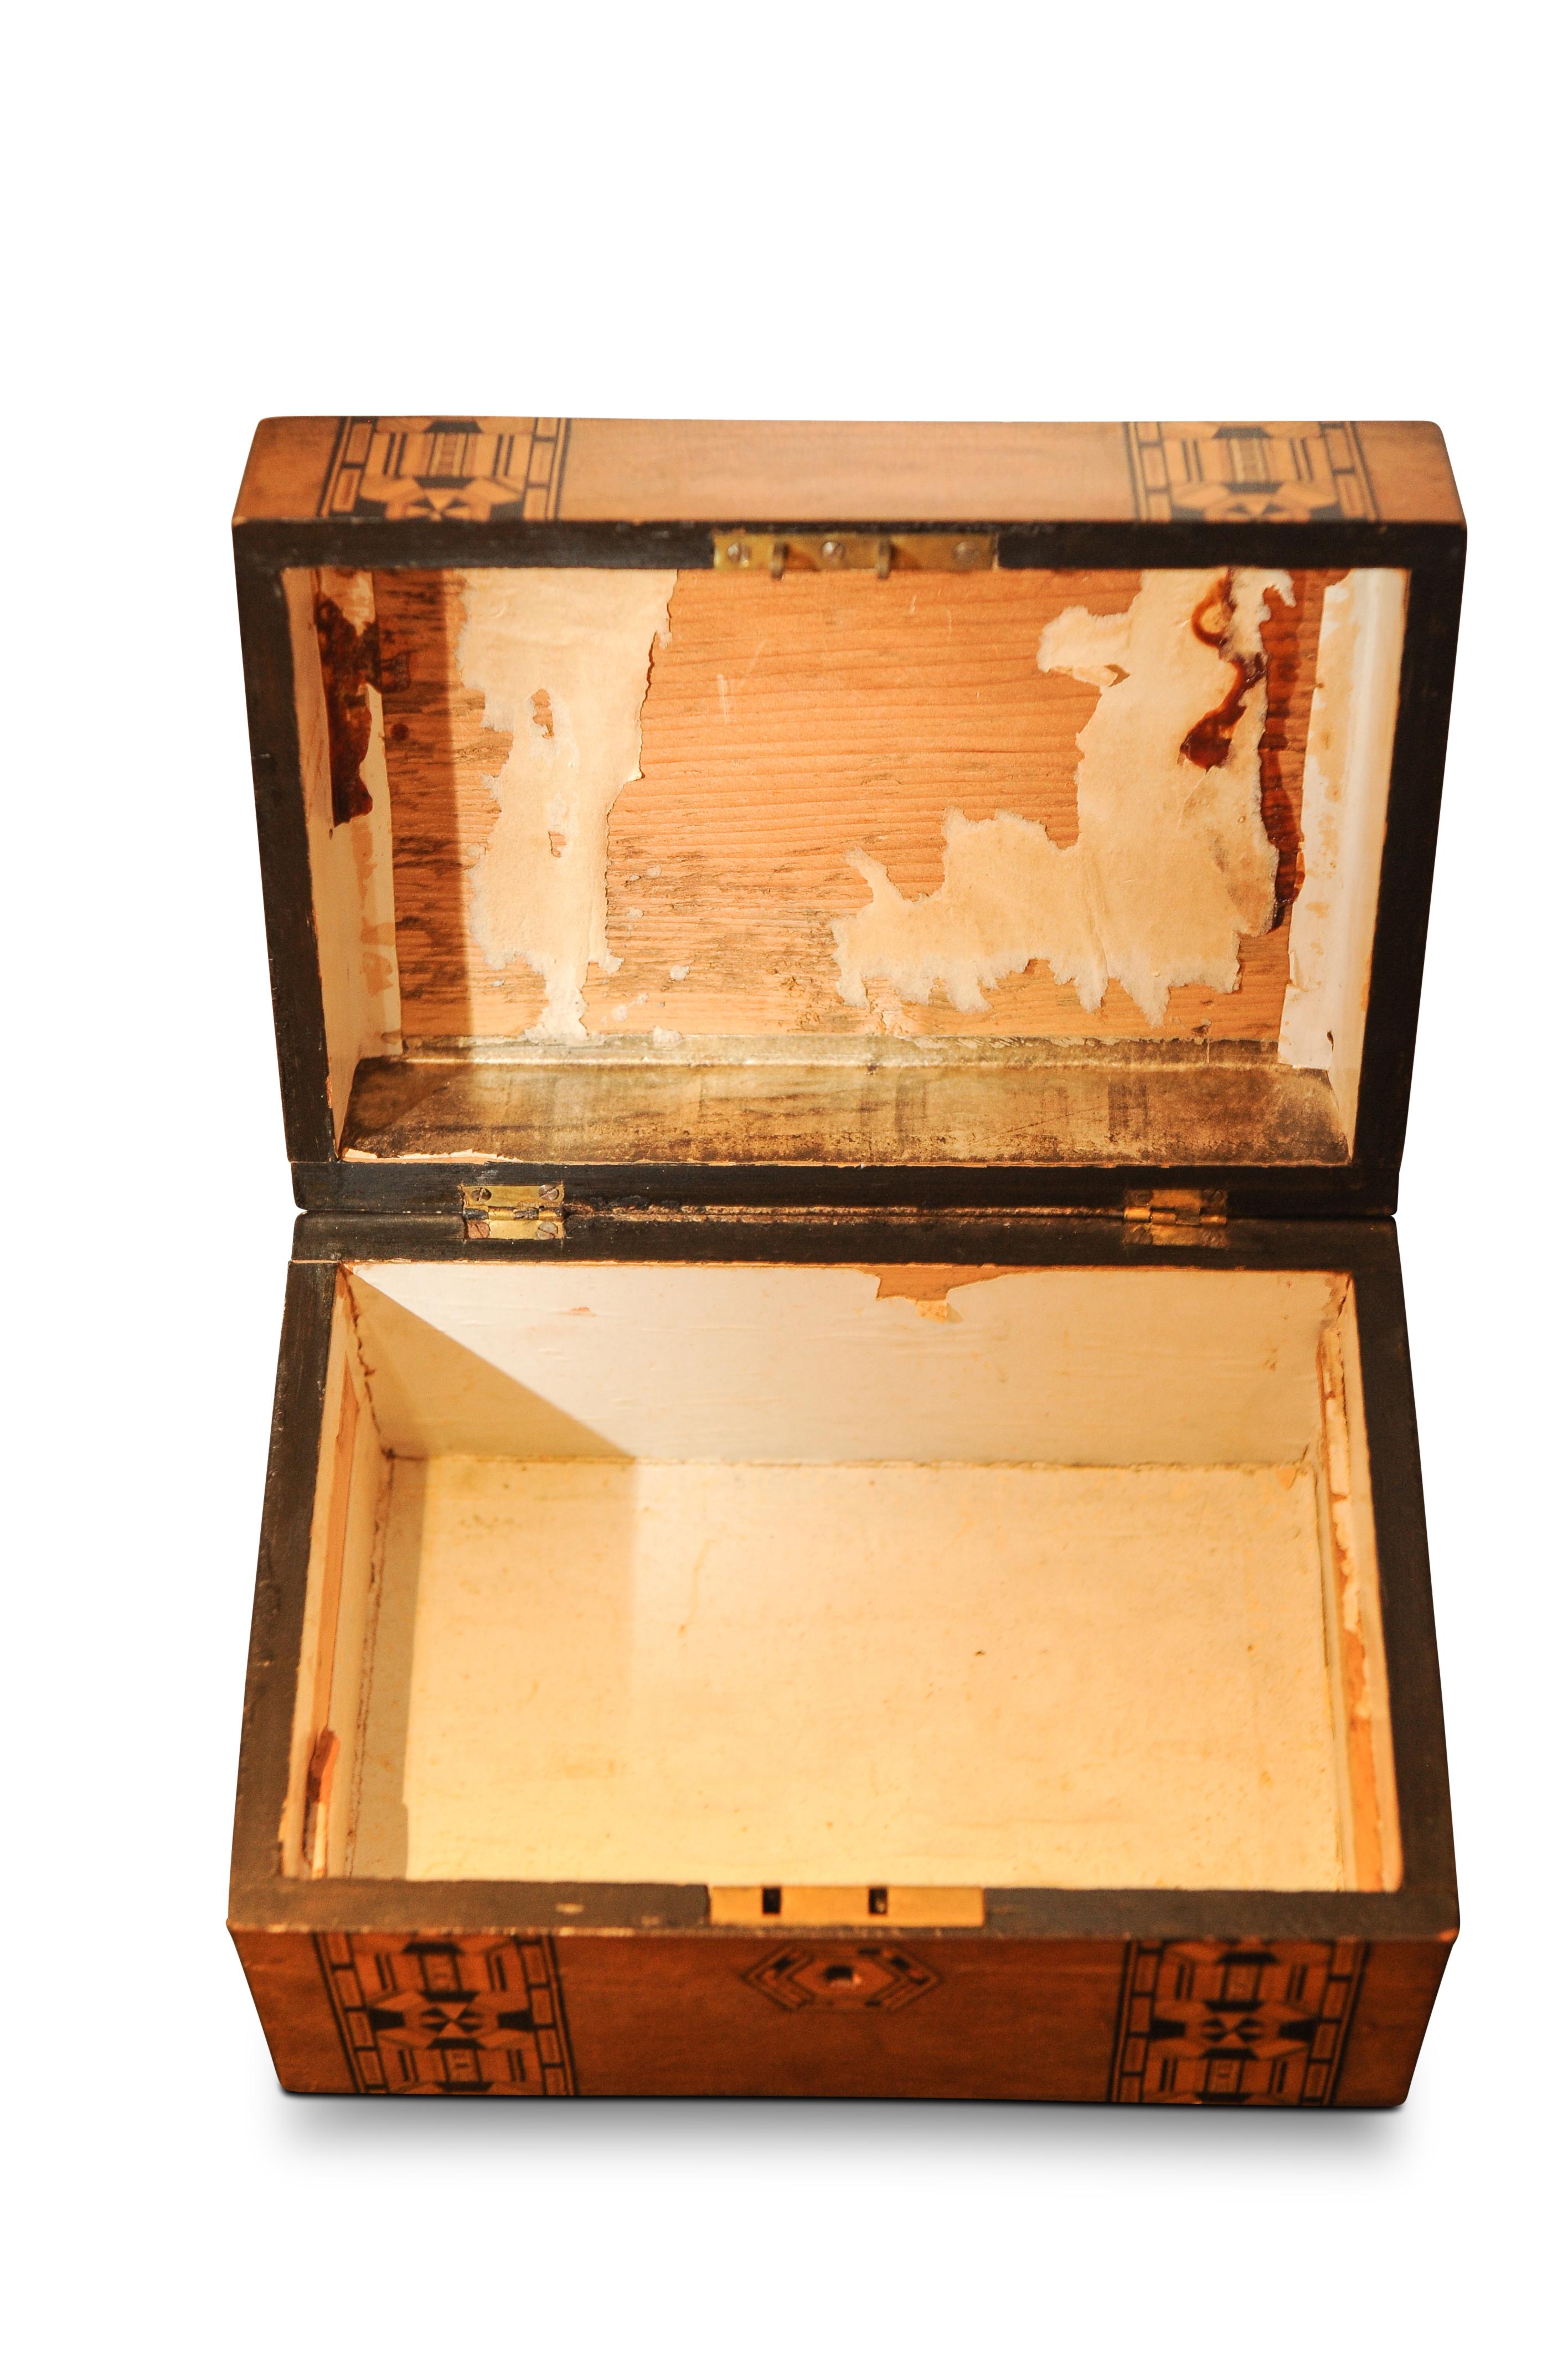 Victorian 19th century Tunbridge ware collectors box with original features.

Tunbridge ware is a form of decoratively inlaid woodwork, typically in the form of boxes, that is characteristic of Tonbridge and the spa town of Royal Tunbridge Wells